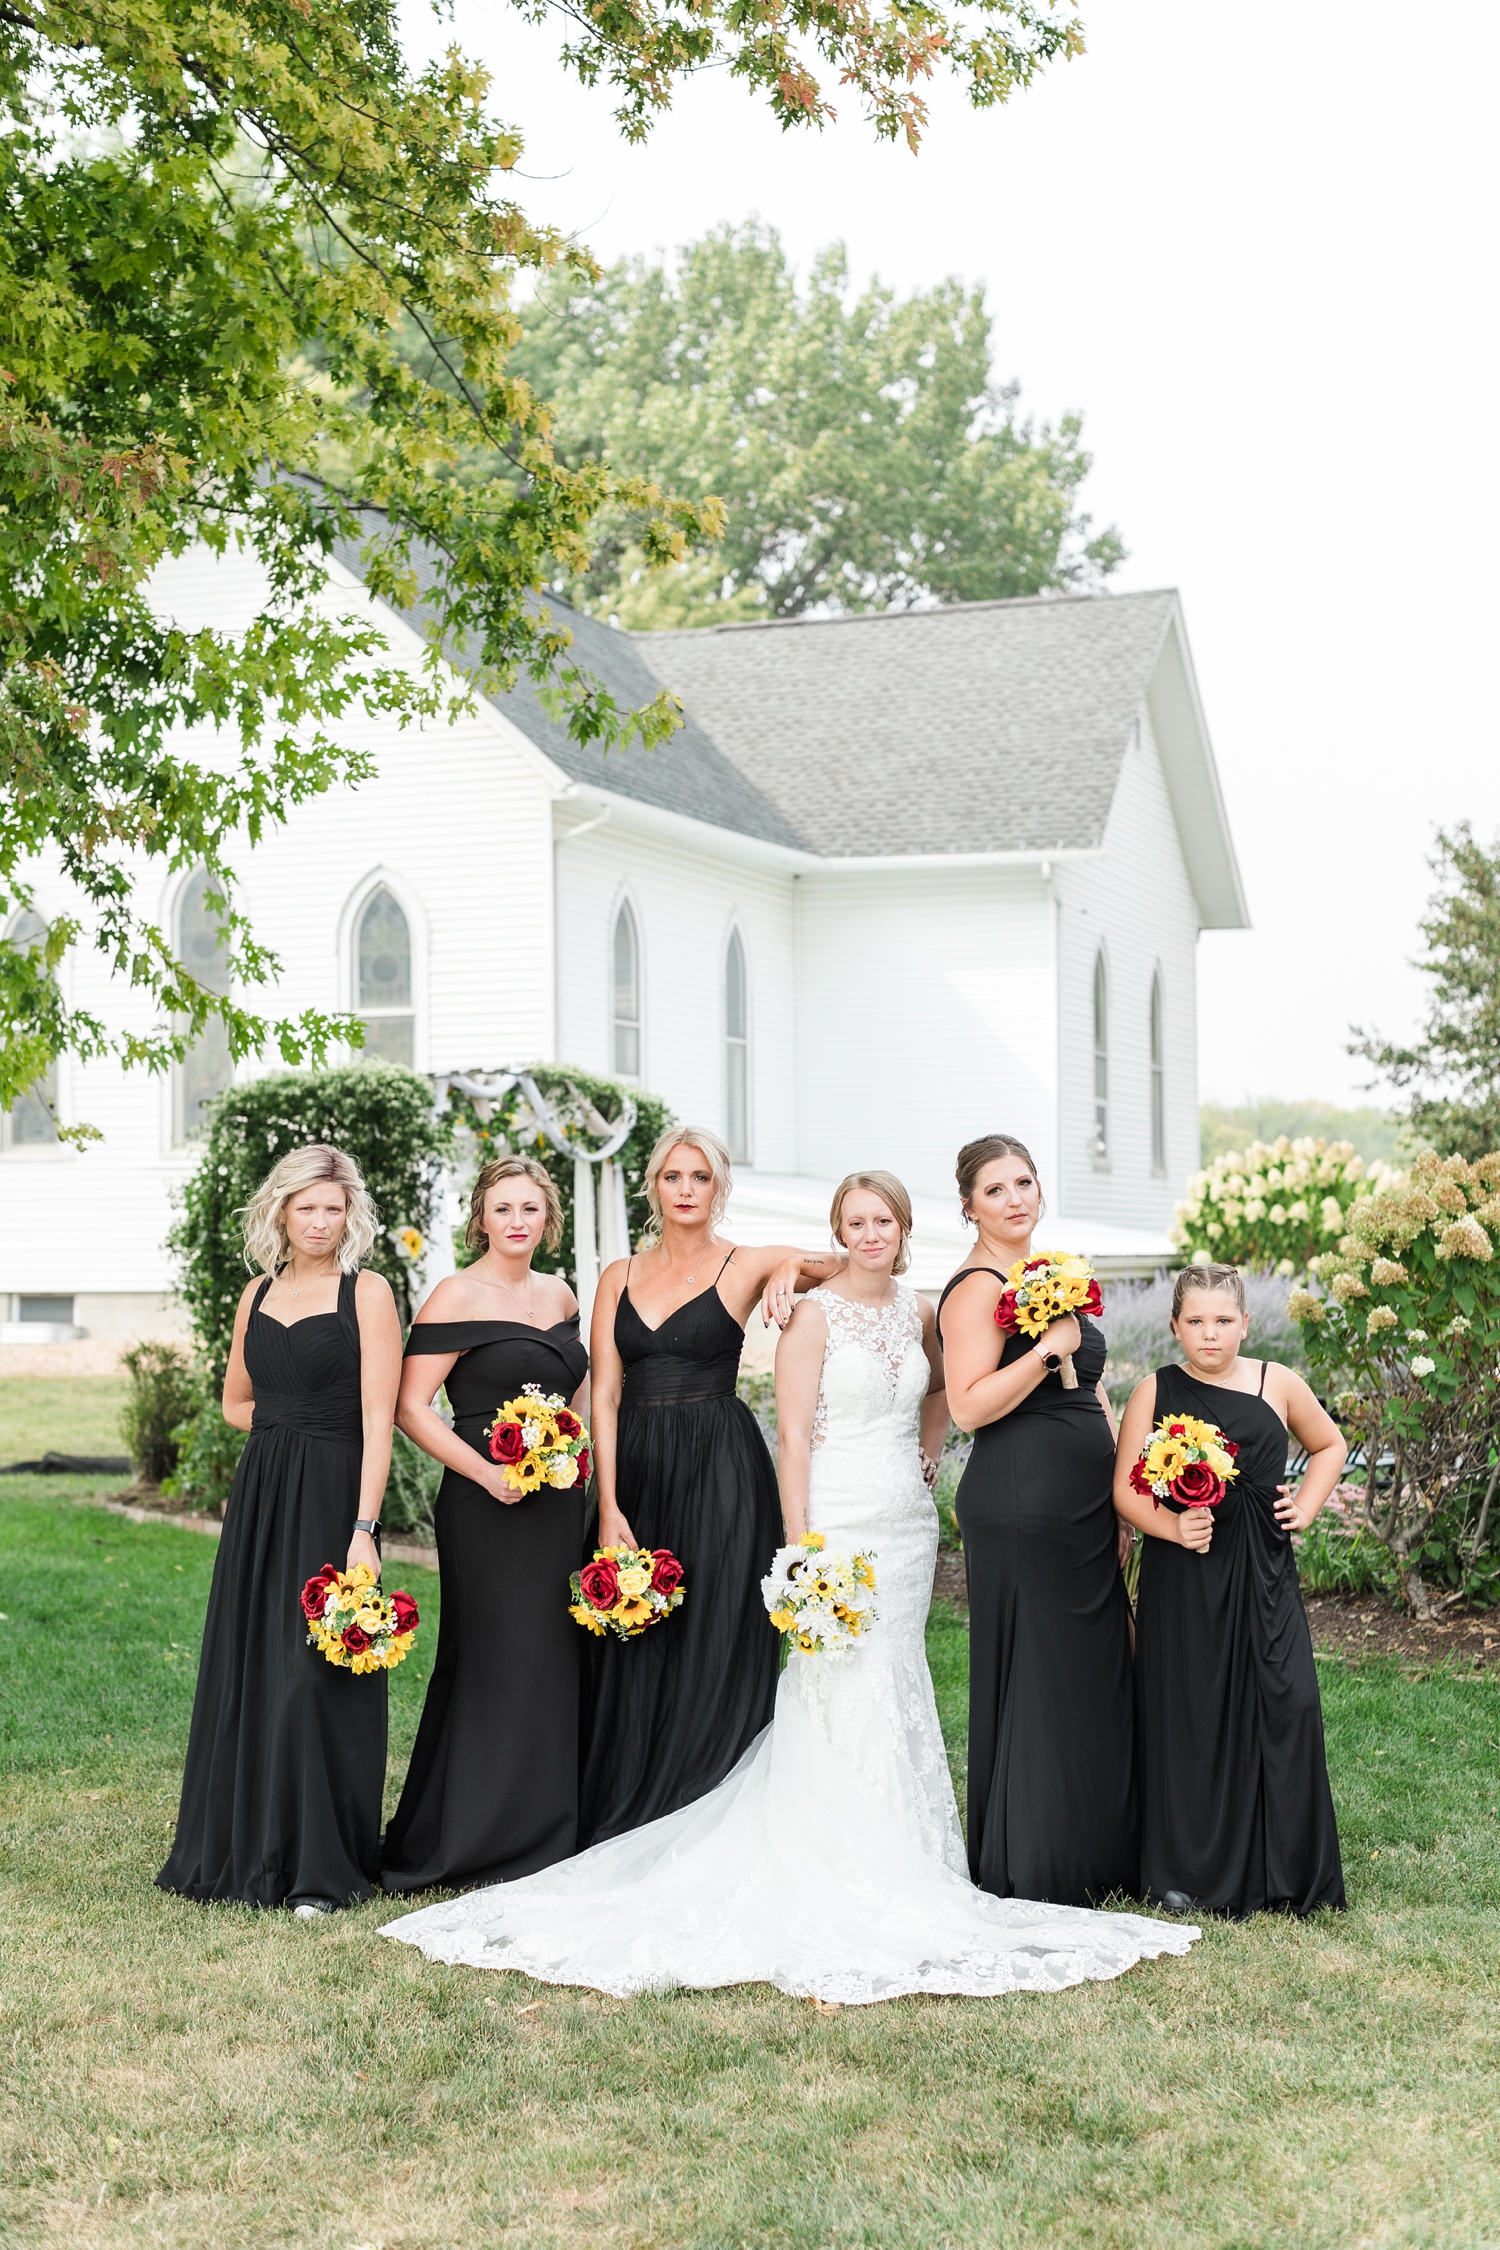 Mckennan and her bridesmaids model pose in the garden space at the Humboldt County Museum with the Hardy church in the background | CB Studio